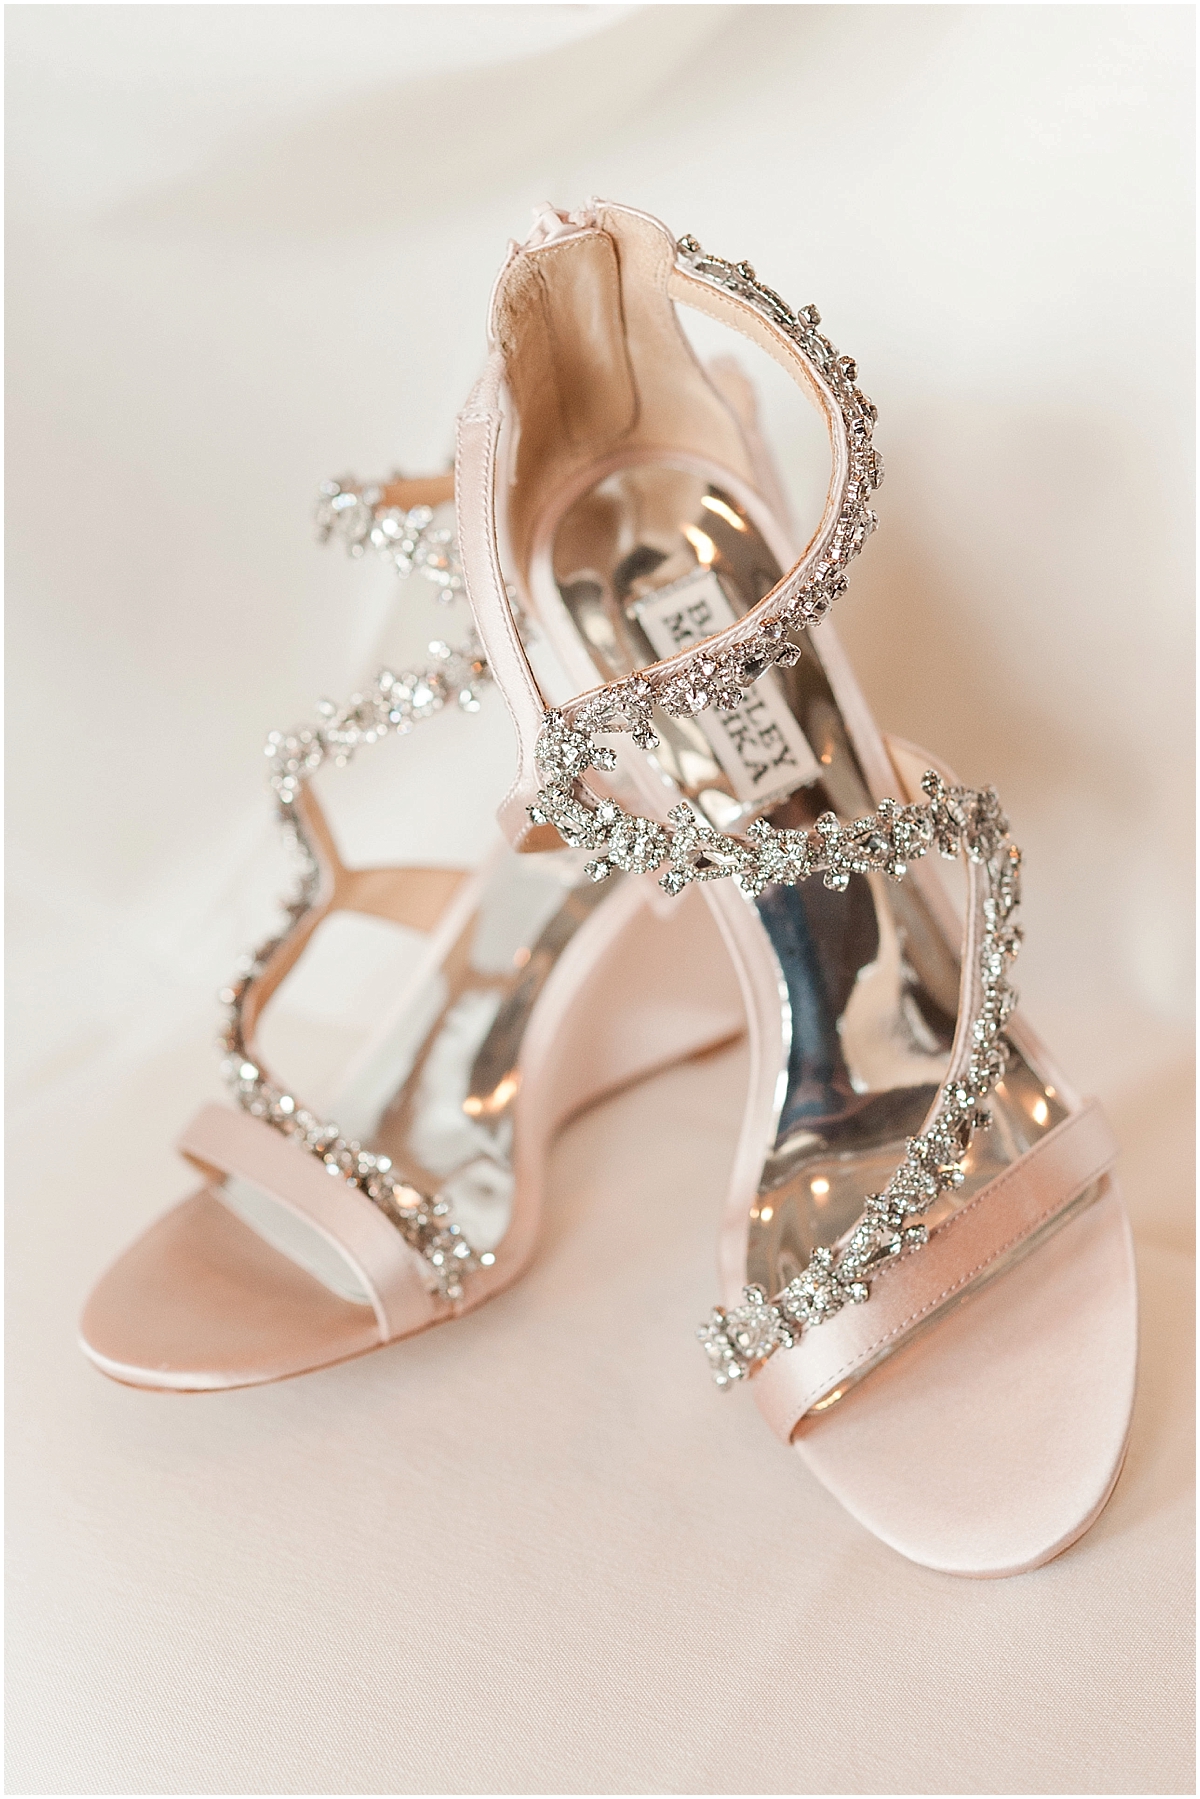 Wedding Day Details, shoes, wedding dress, bouquet, and all about the detail box. What items you should have on your wedding day Pipers Photography , Wedgewood Golf and Country Club Wedding Powell Ohio, Heritage Golf Club Wedding Hilliard Ohio, Badgley Mischka bridal Shoes 